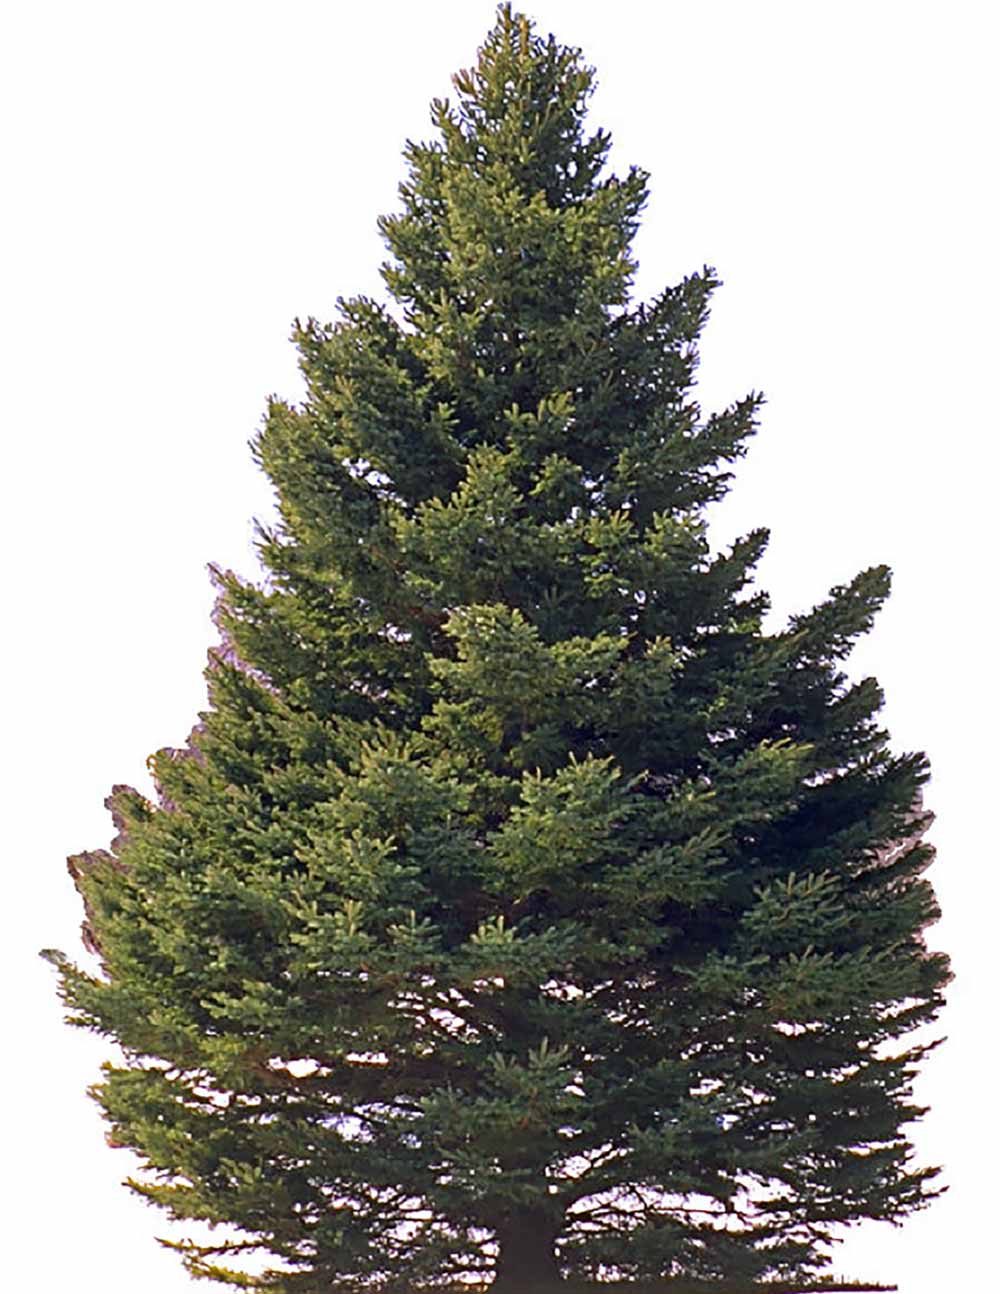 Image of a green pine tree